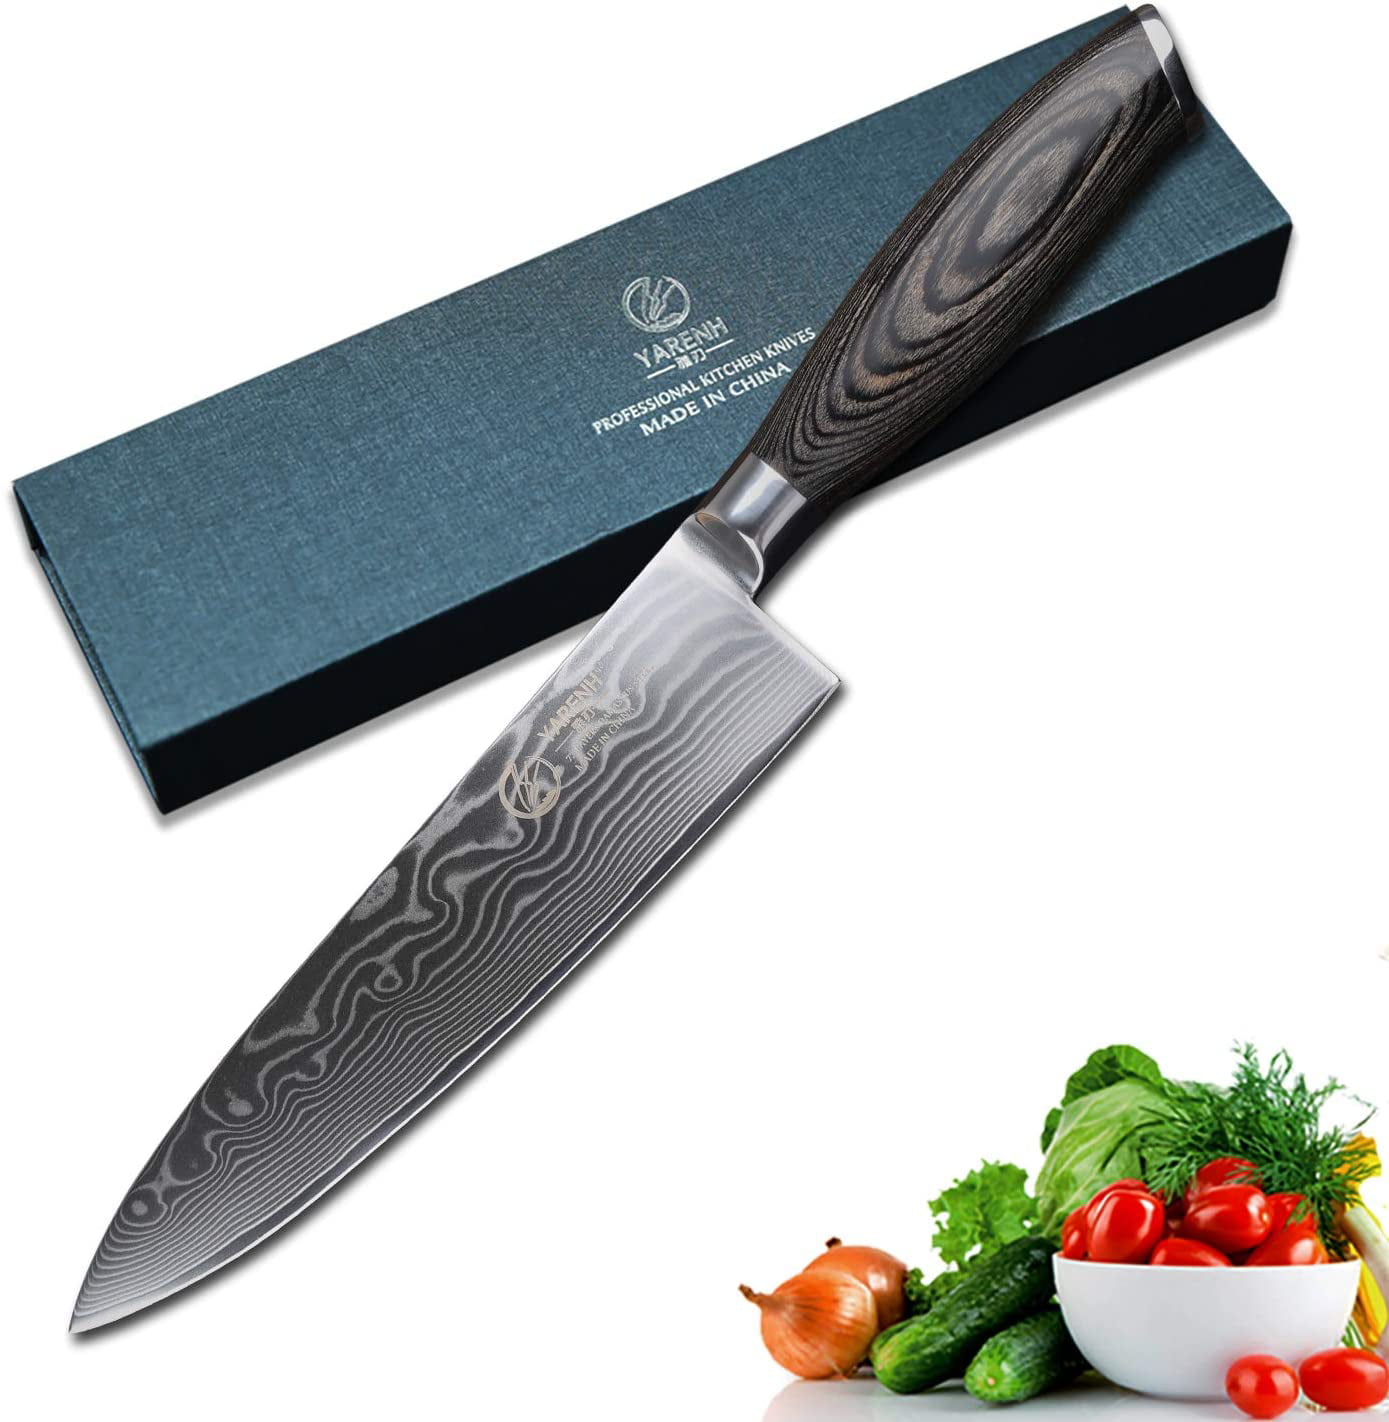 Yarenh Chef Knife 8 inch,High Carbon Japanese Damascus Steel Blade ...